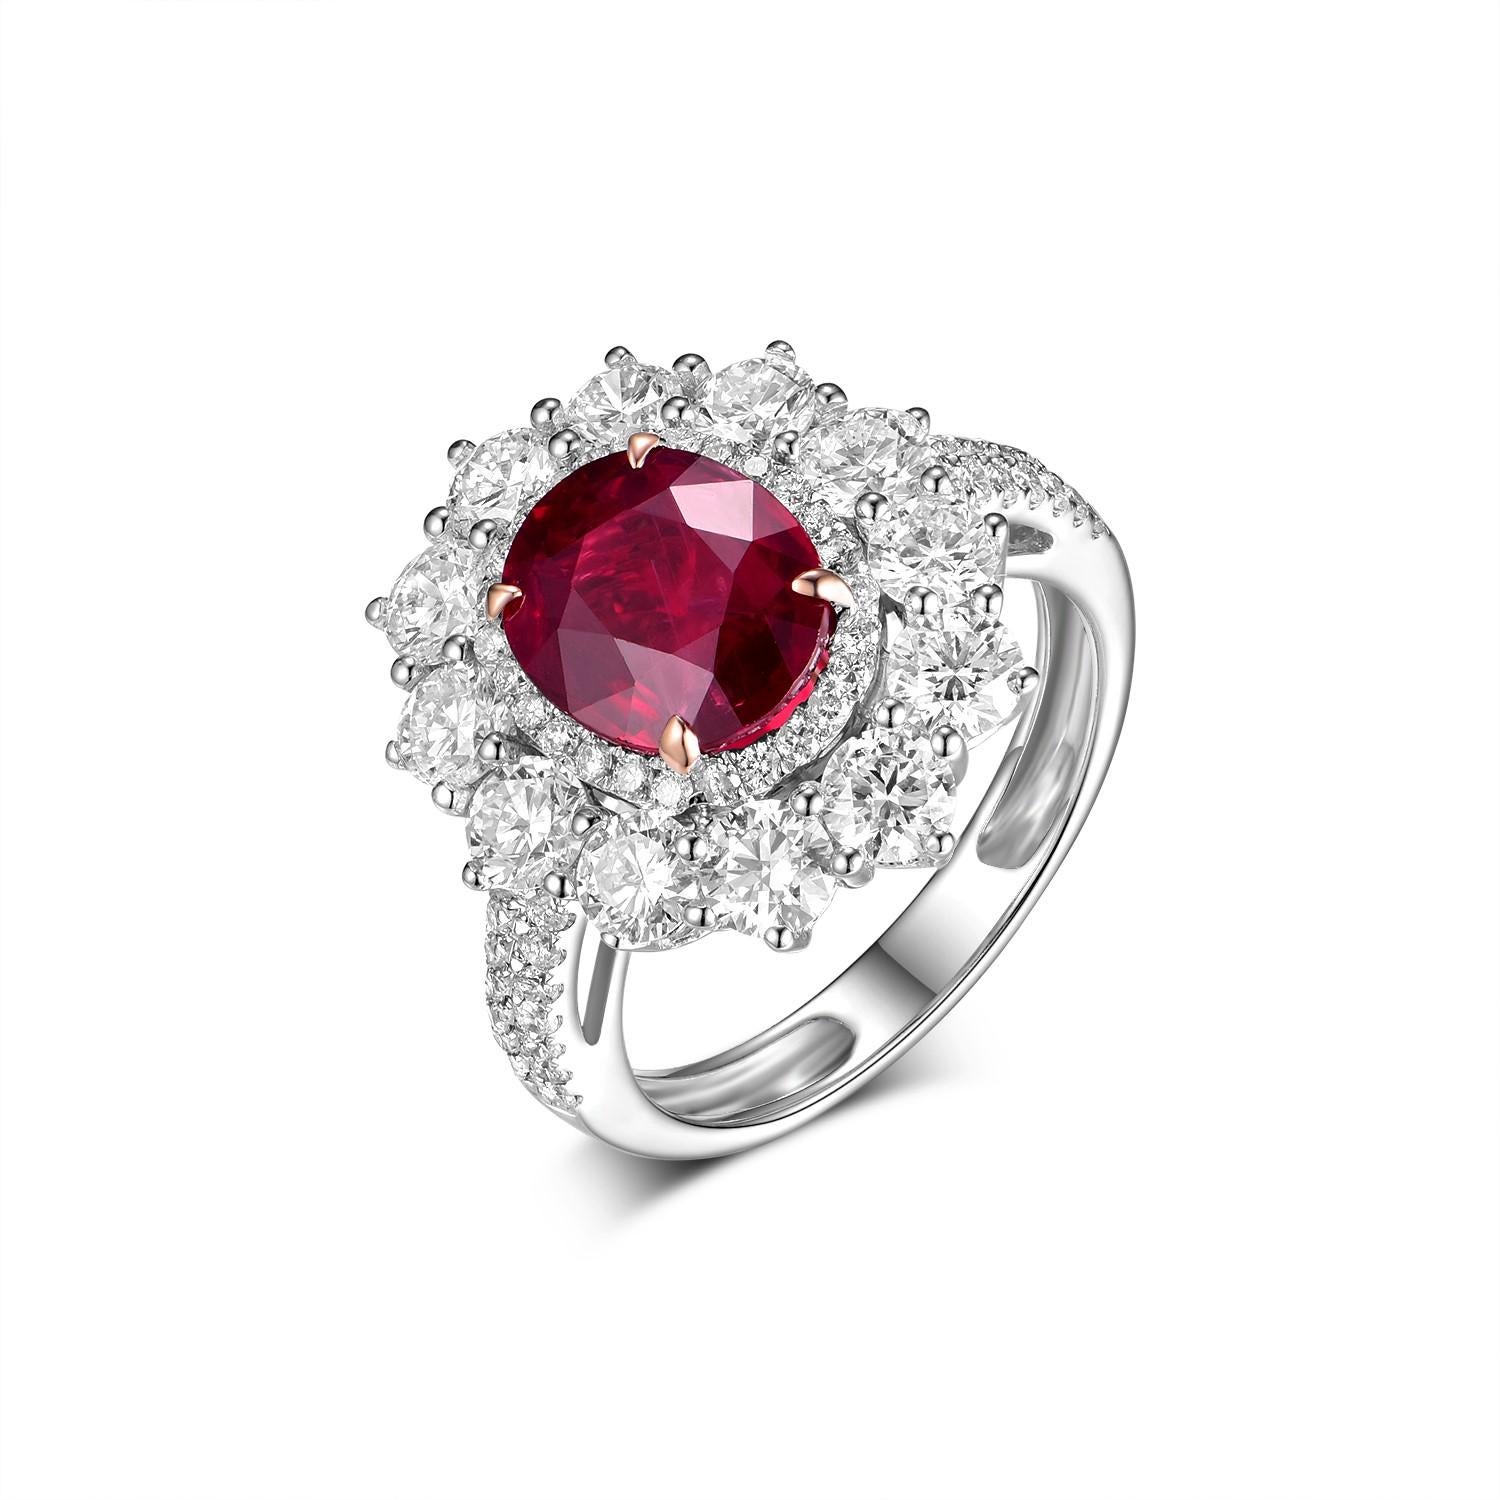 Introducing our stunning Mozambique Ruby and Diamond Ring, a masterpiece of contemporary design and exquisite craftsmanship. At the heart of this ring lies a captivating 2.53 carat Mozambique ruby, radiating a vivid red hue that commands attention.